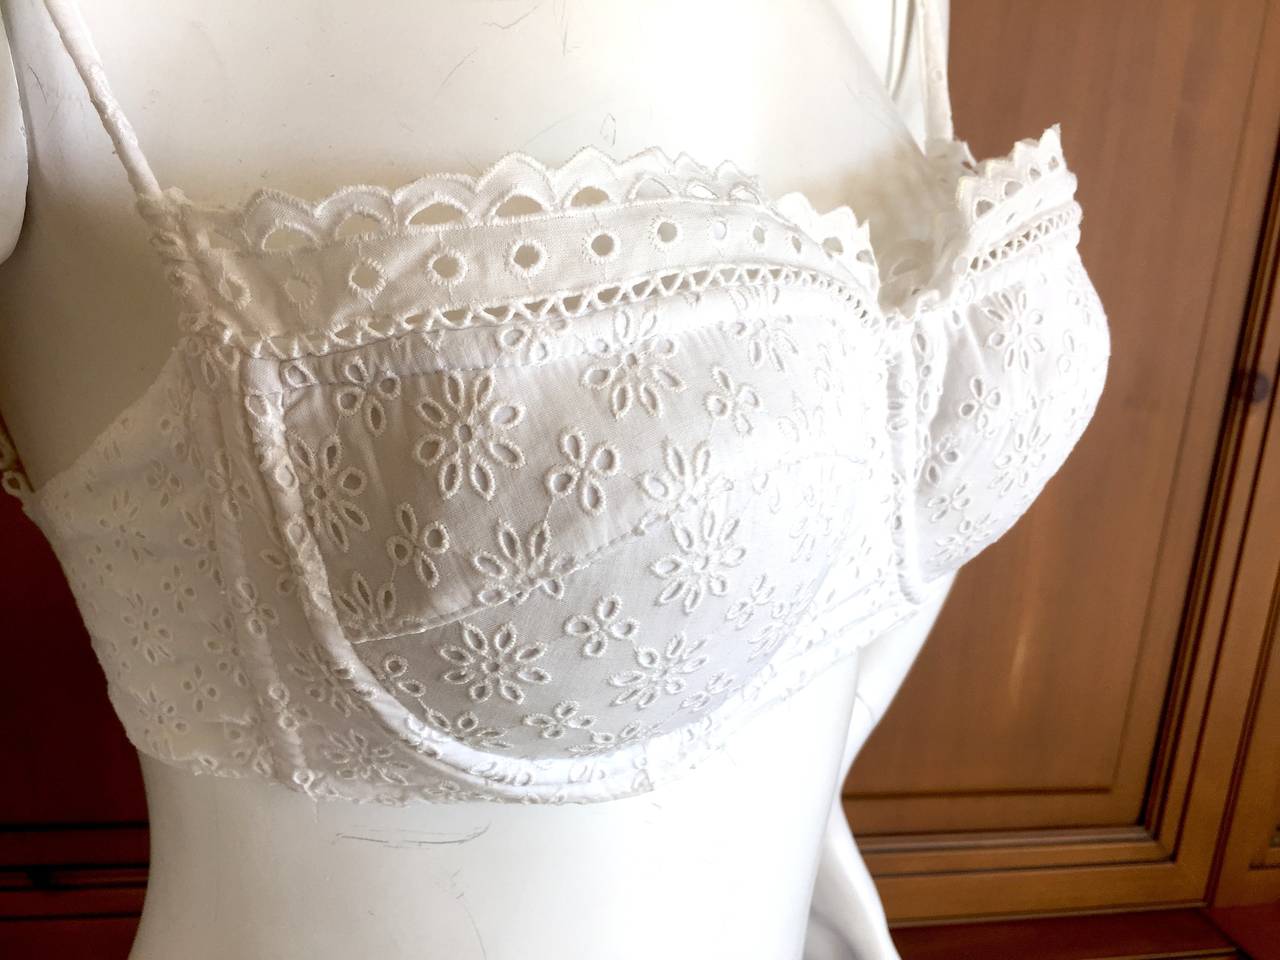 Alaia Vintage Broderie Anglaise Eyelet Bra's.
Two vintage 1980's bra's from Azzedine Alaia.
Generously padded.
One is brand new with tags, the other has been worn and looks like it has a touch of make up along the top of the lace.s
Style called